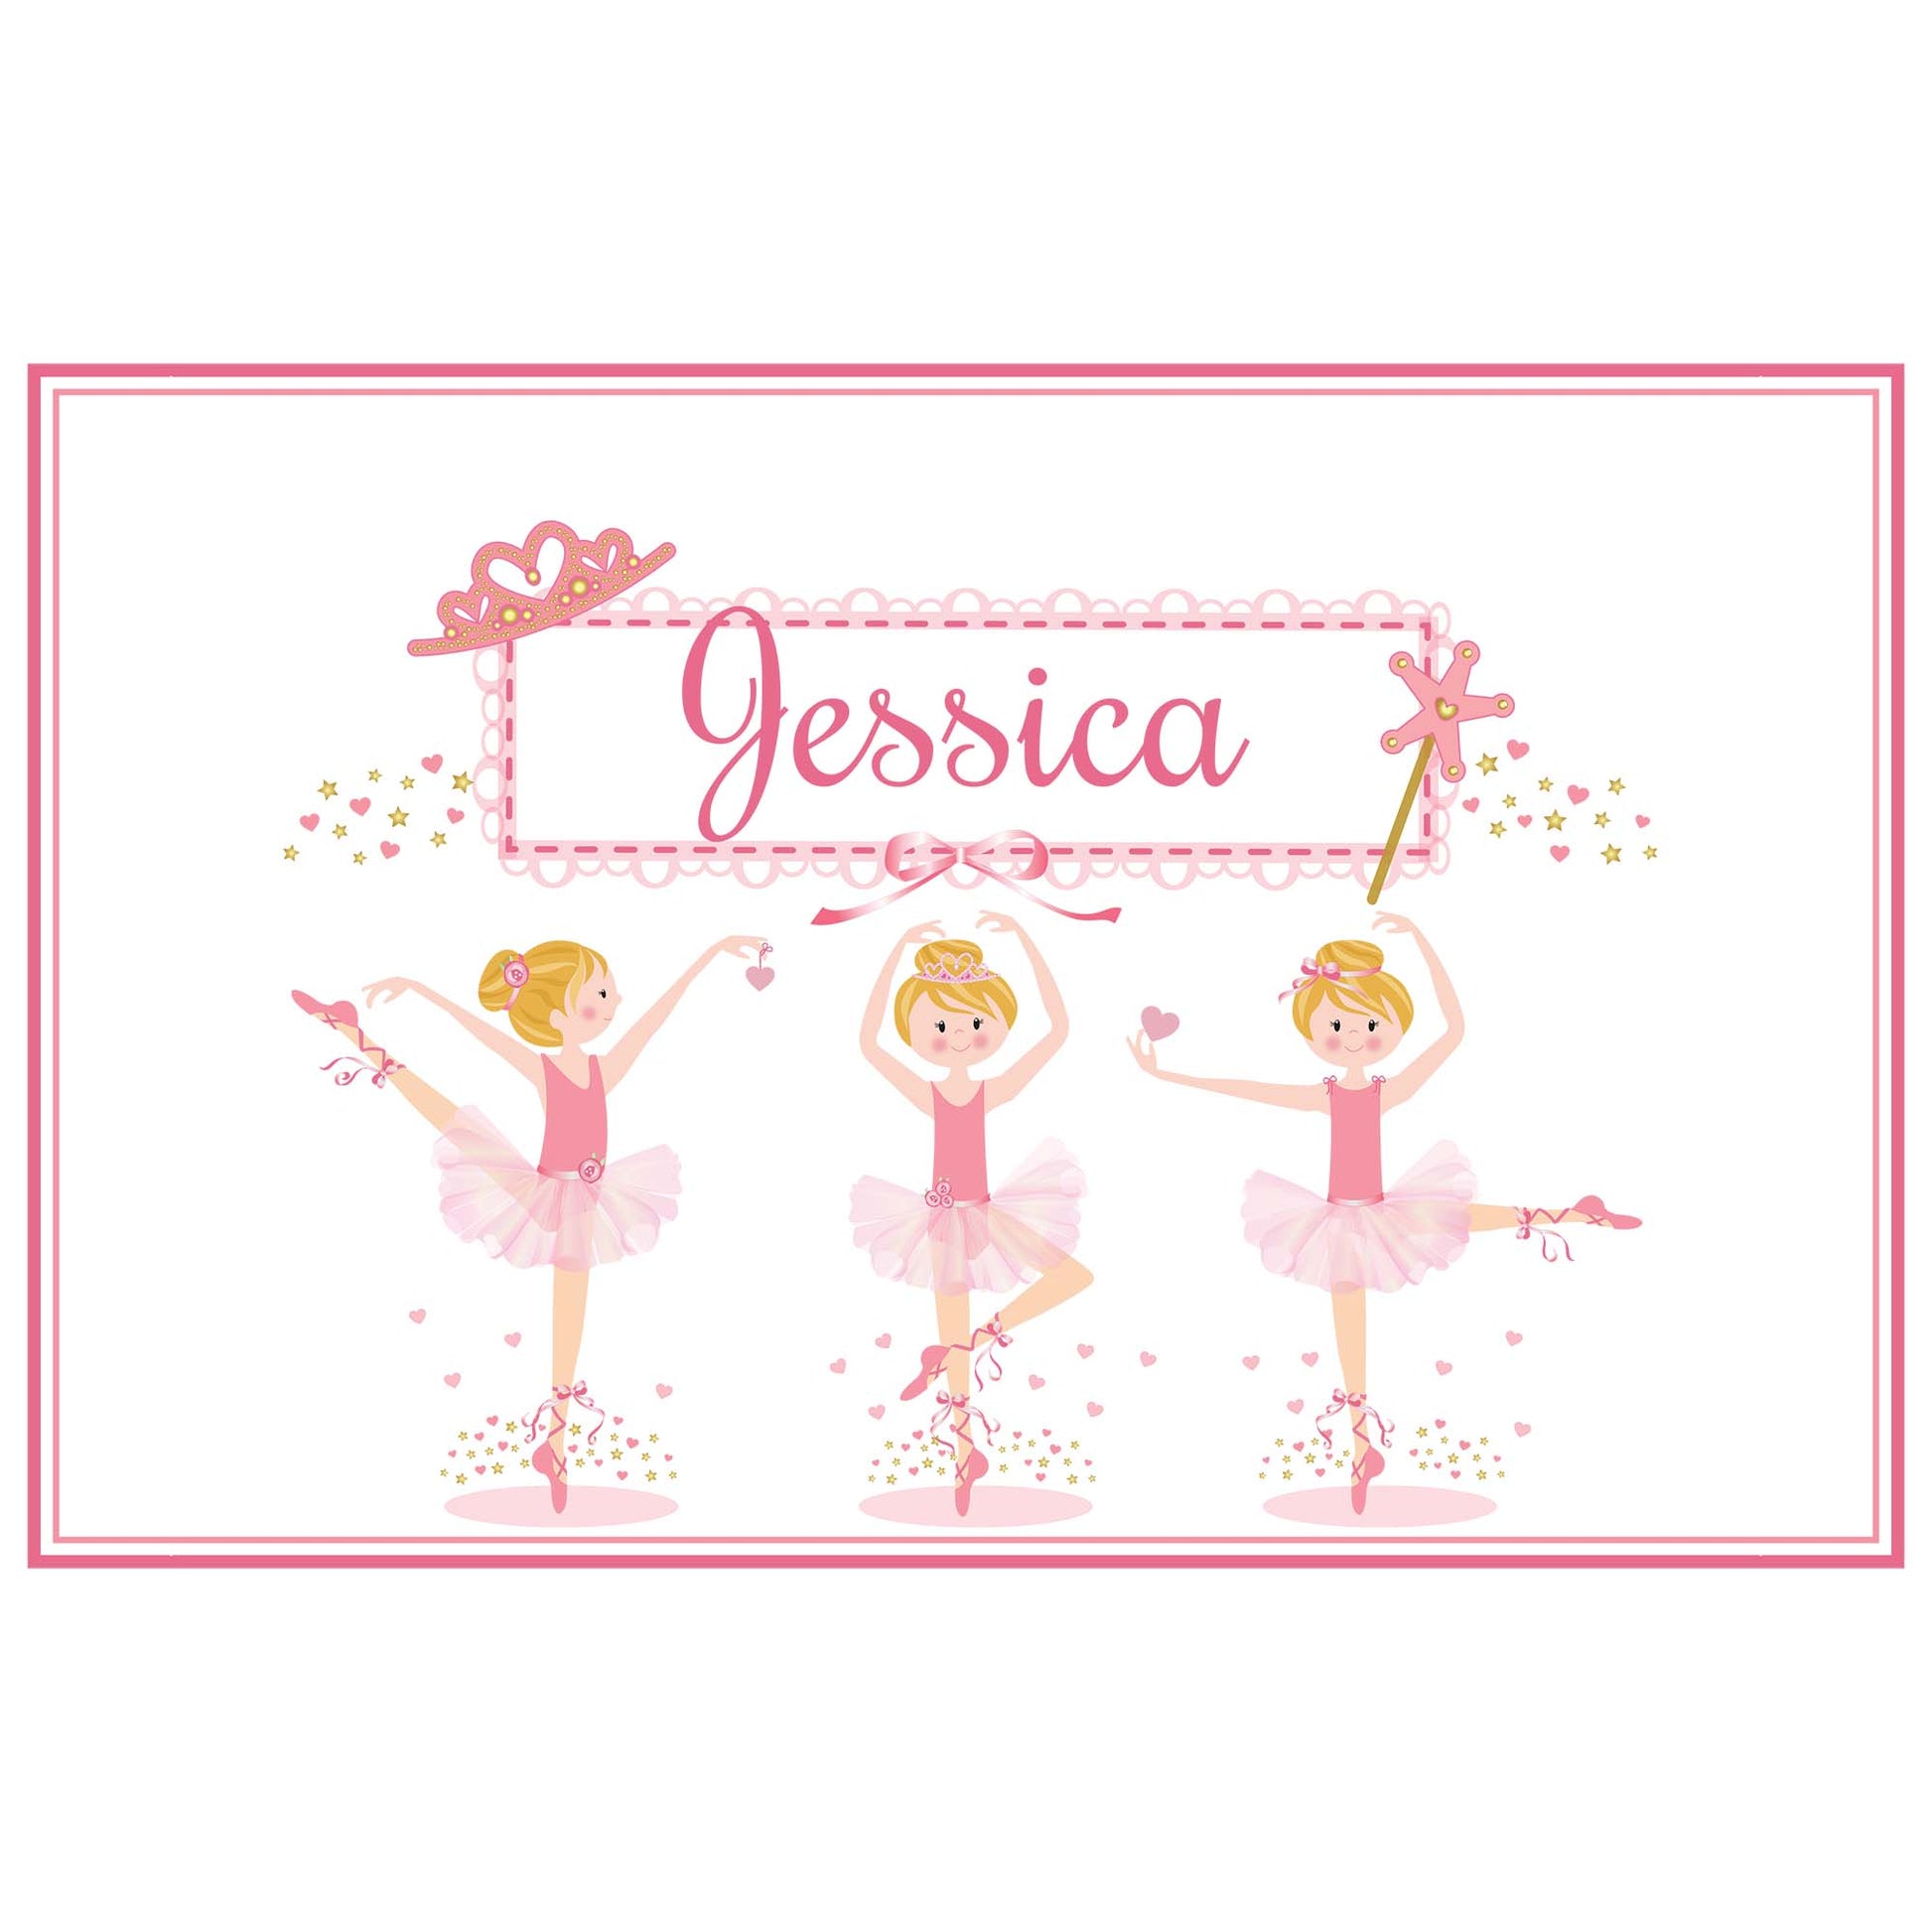 Personalized Placemat with Ballerina Blonde design